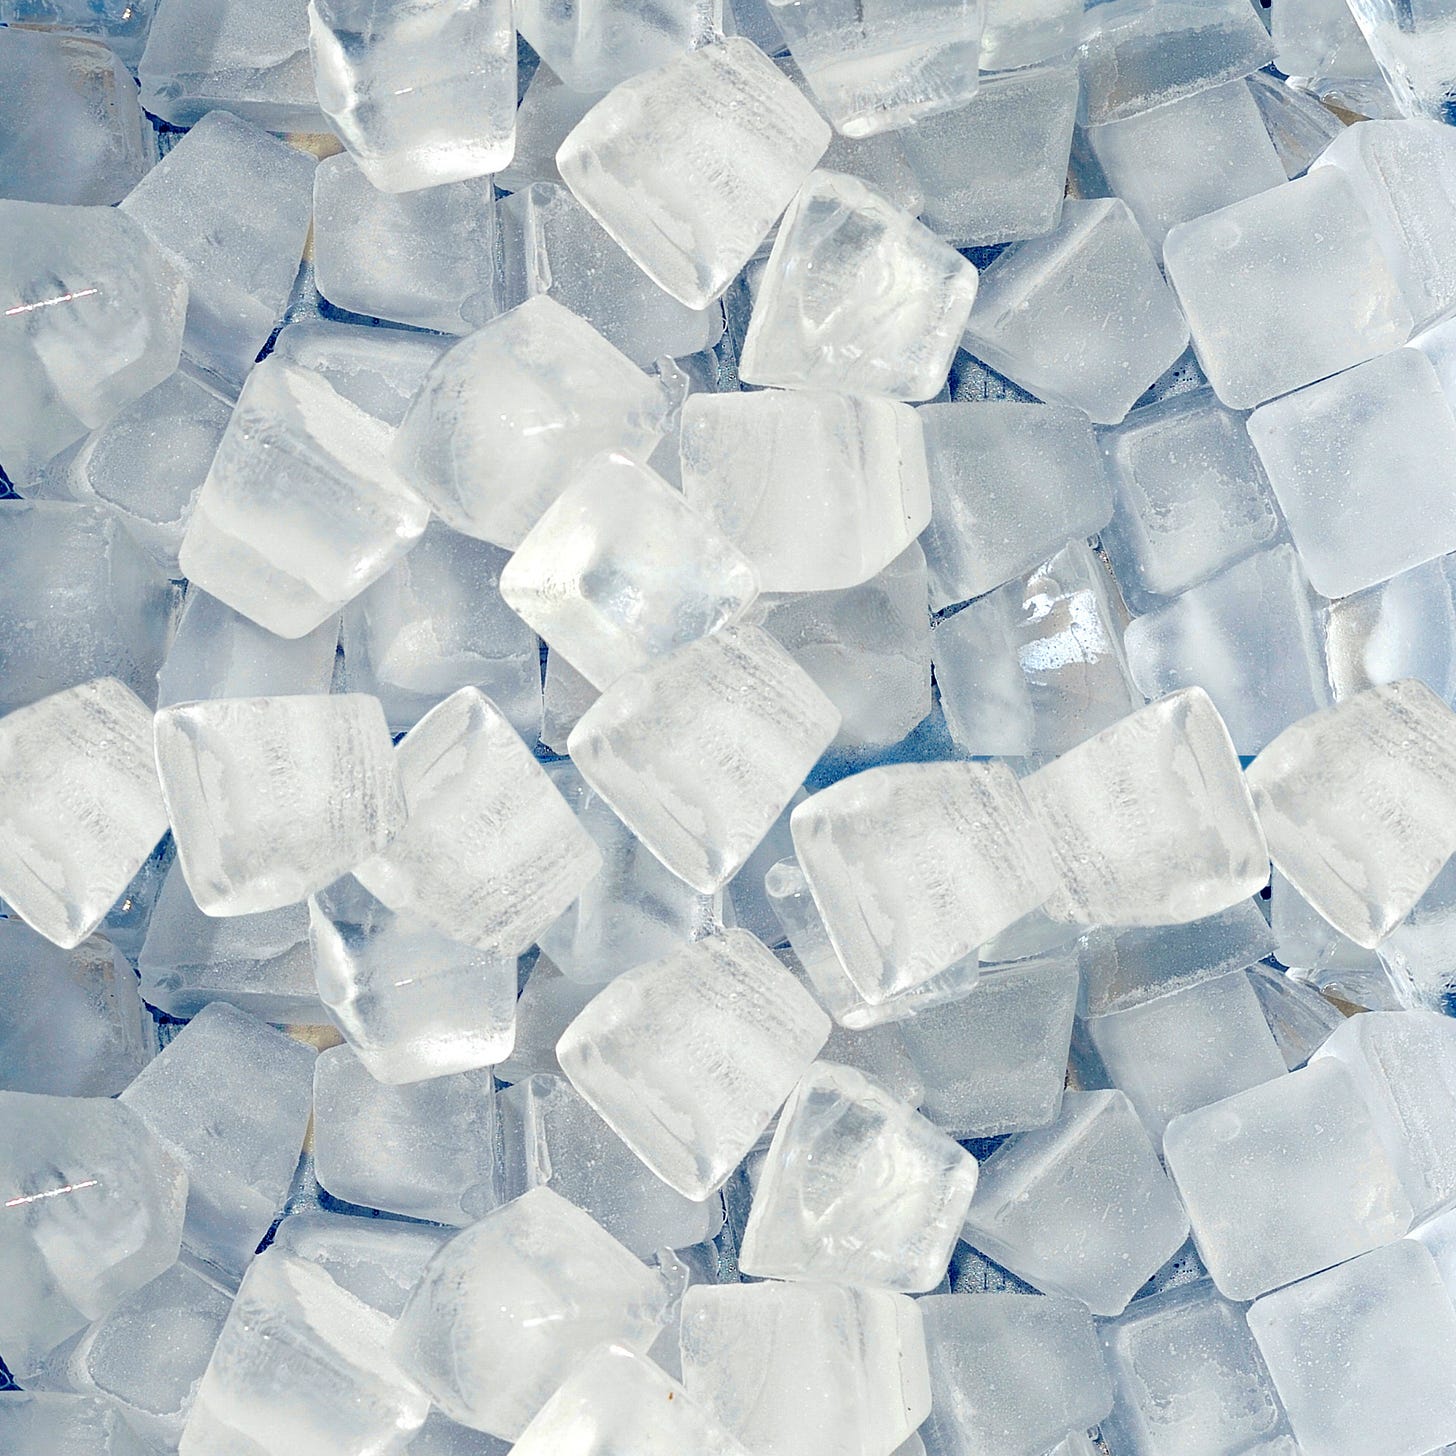 Ice cubes and crushed ice from Valais | Valais Switzerland